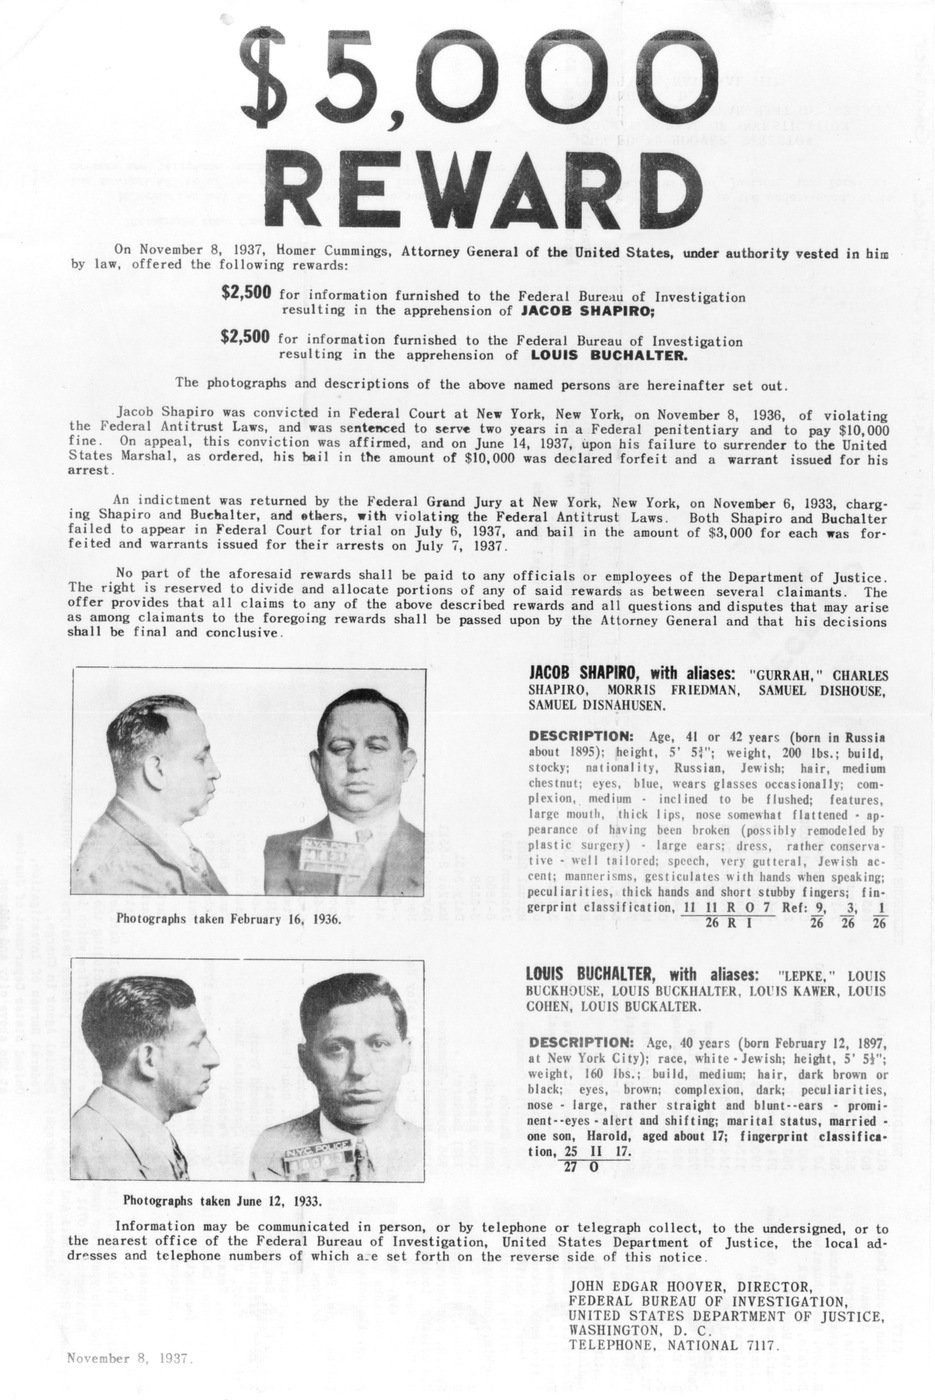 FBI wanted poster for Jacob Shapiro and Louis Buchalter, dated November 8, 1937. Library of Congress image.